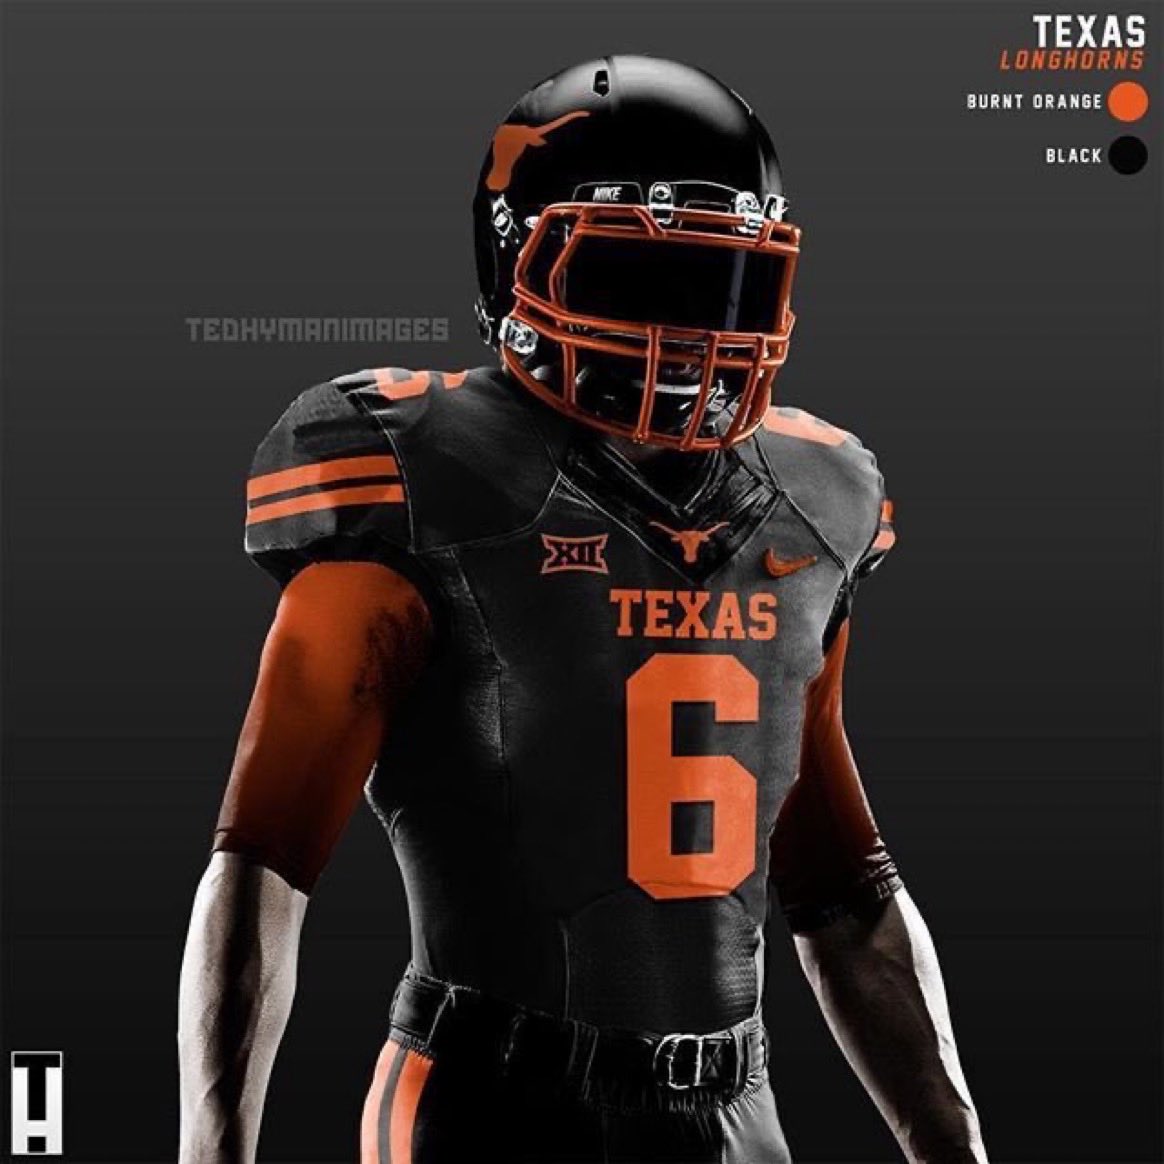 #BREAKING @TexasFootball is announcing today they will wear a special Halloween “blackout” uniform for their game against Georgia on 10/19.